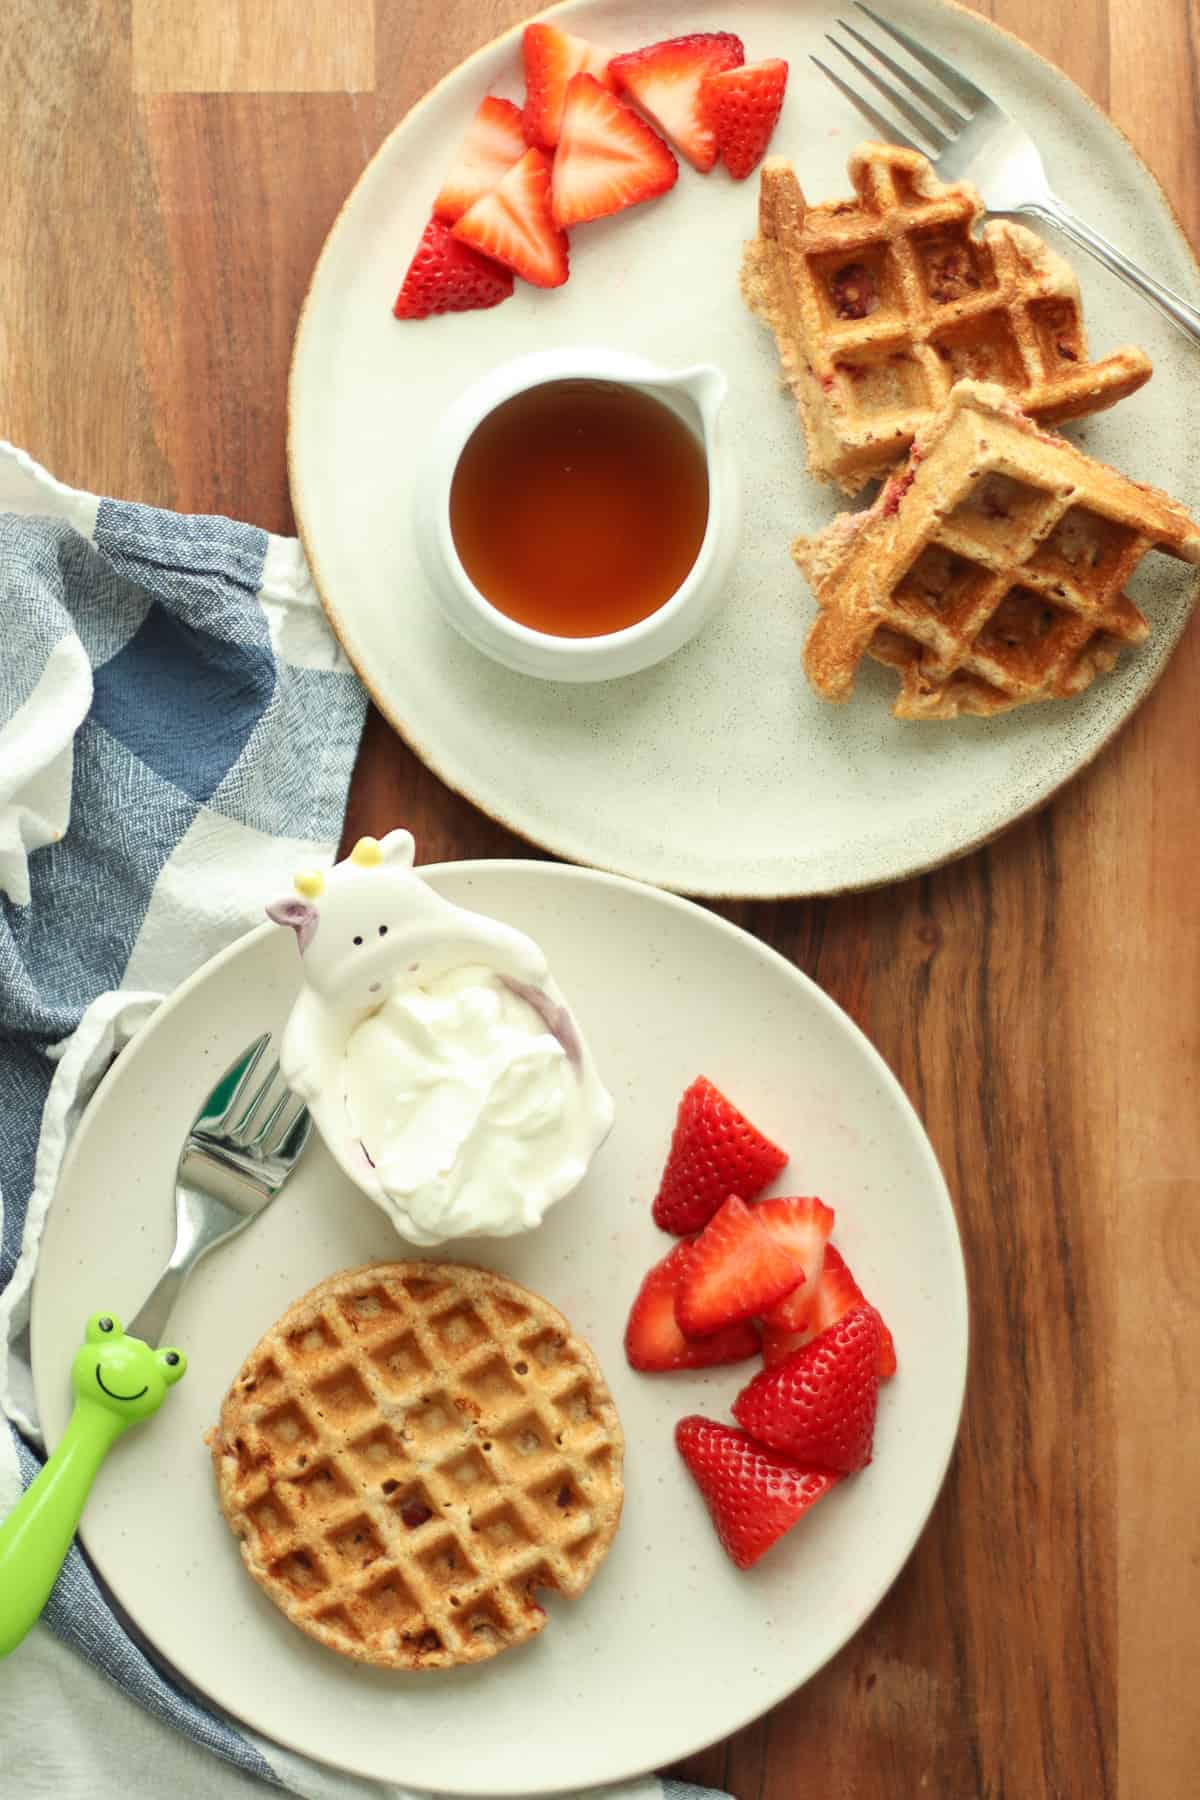 Two plates with strawberry waffles, sliced berries, yogurt, and maple syrup.